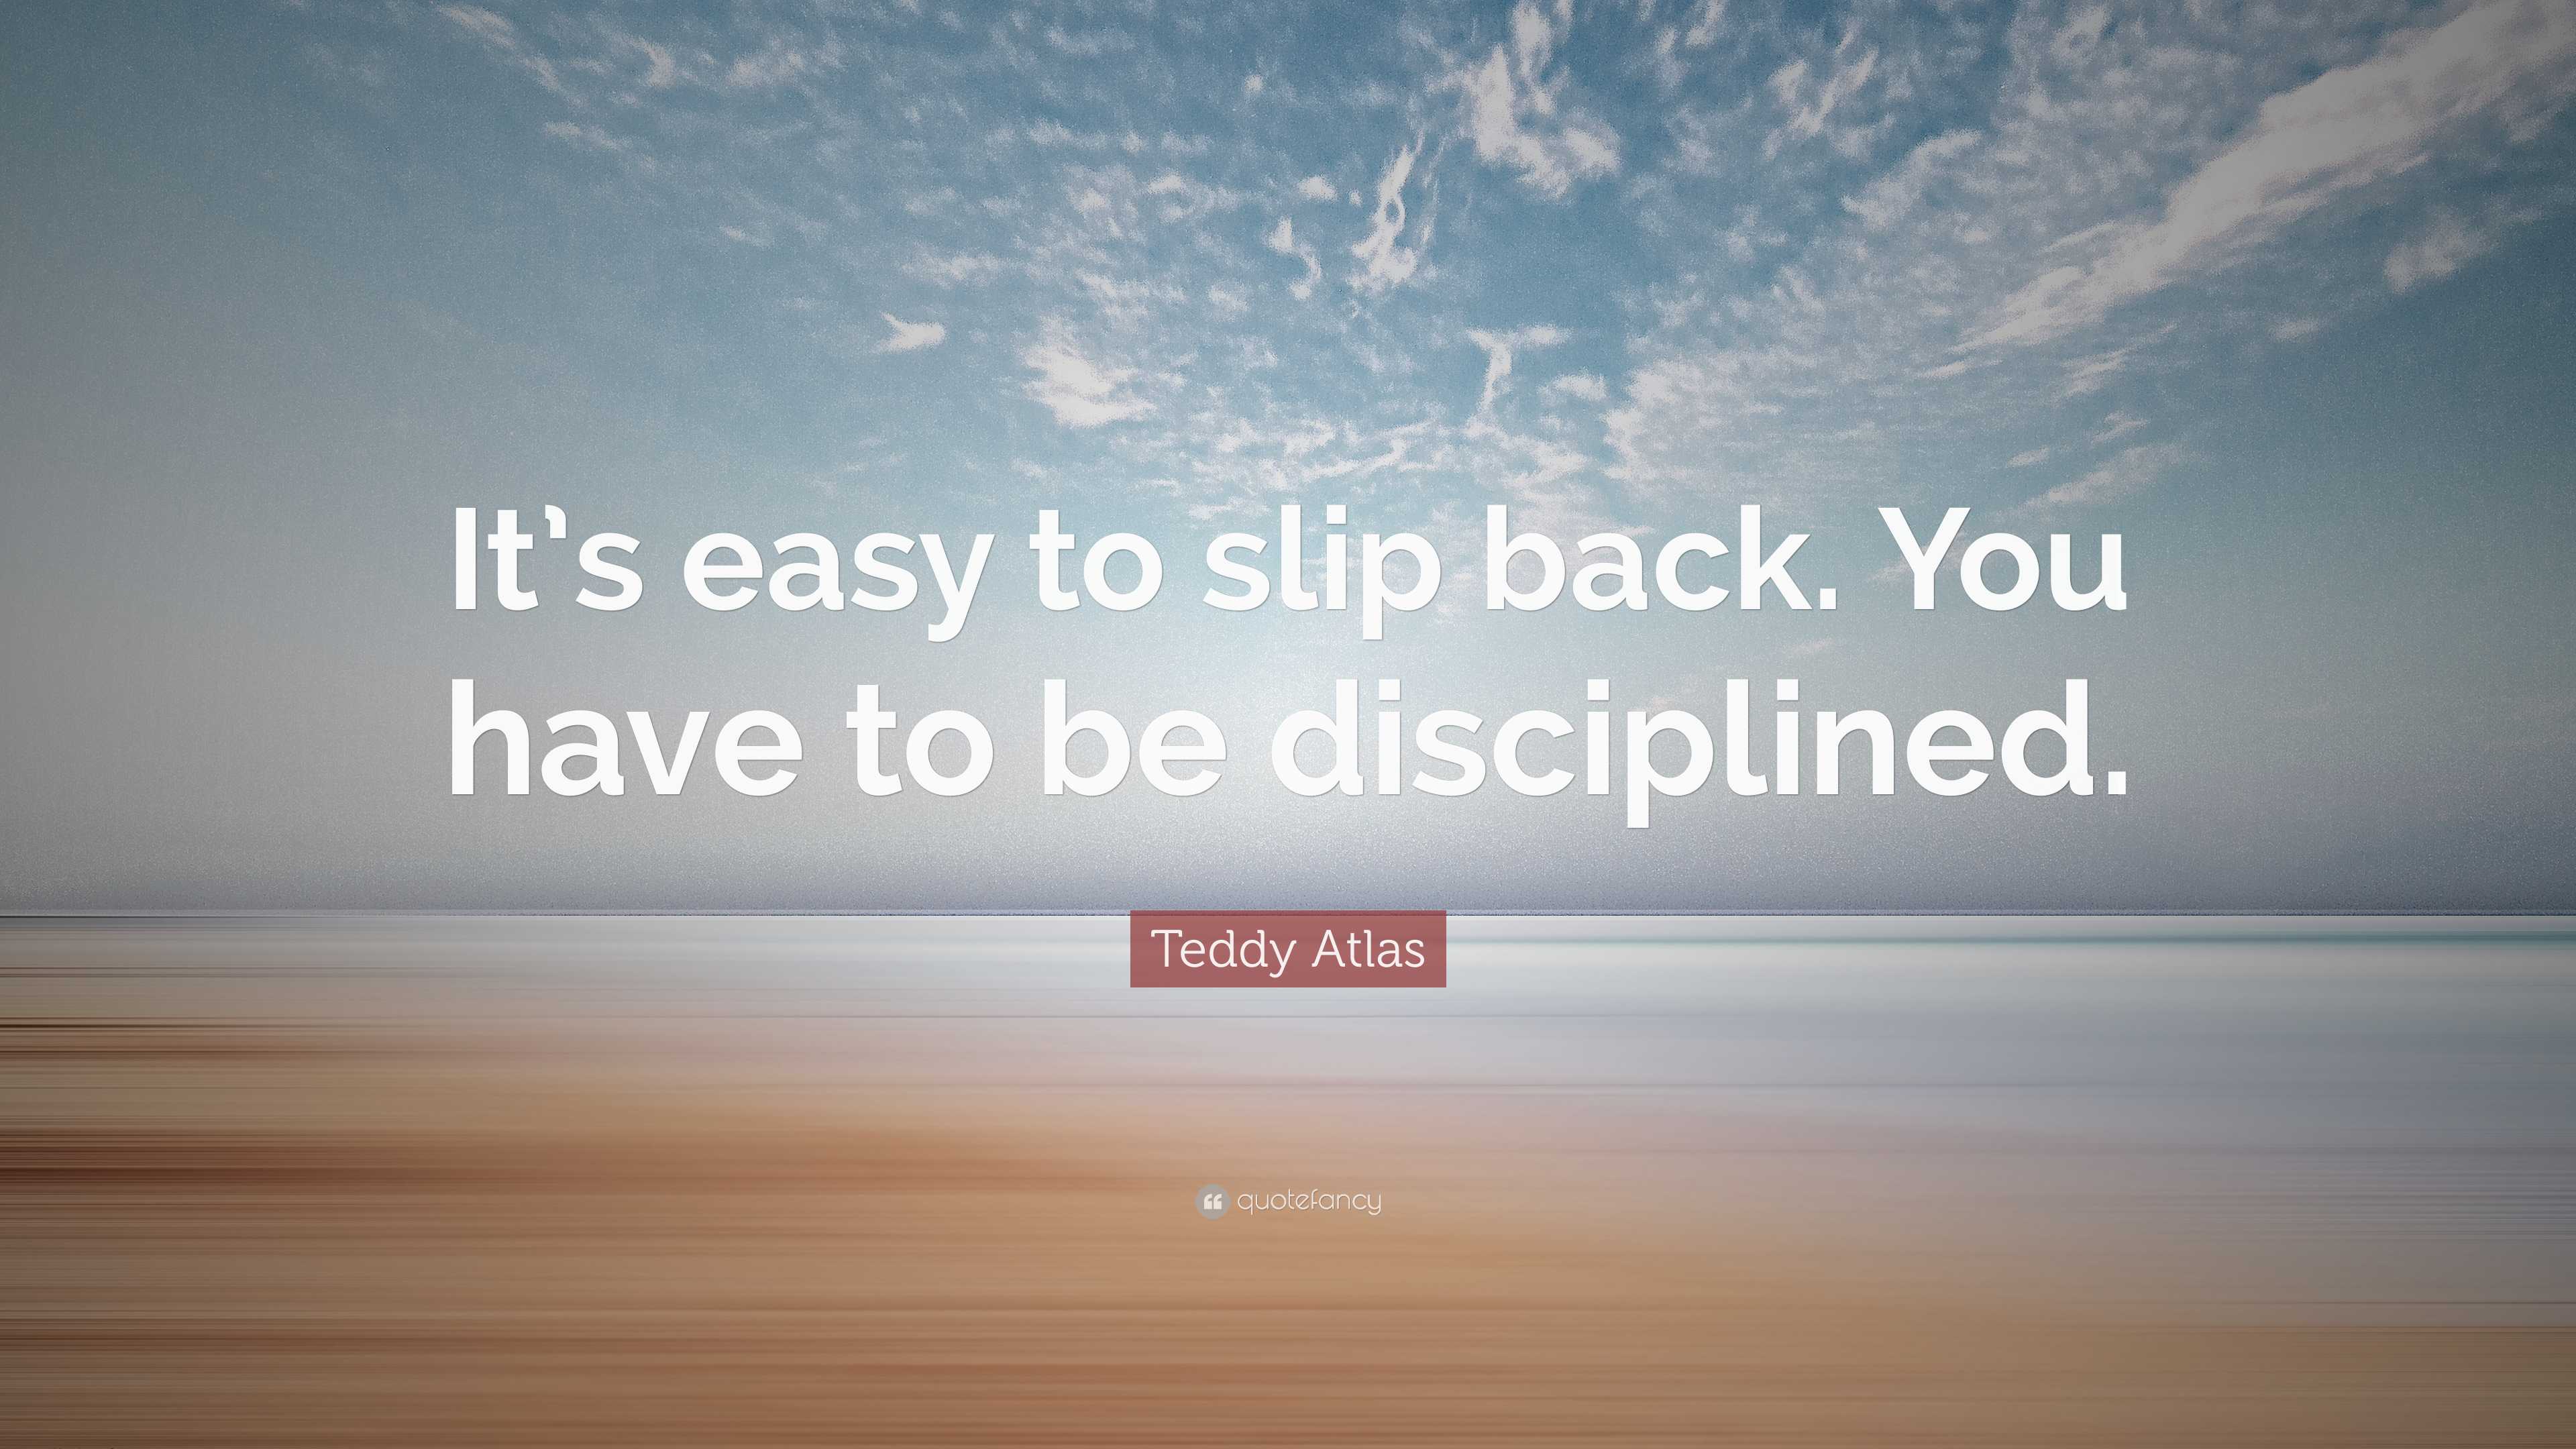 Teddy Atlas Quote: “It's easy to slip back. You have to be disciplined.”